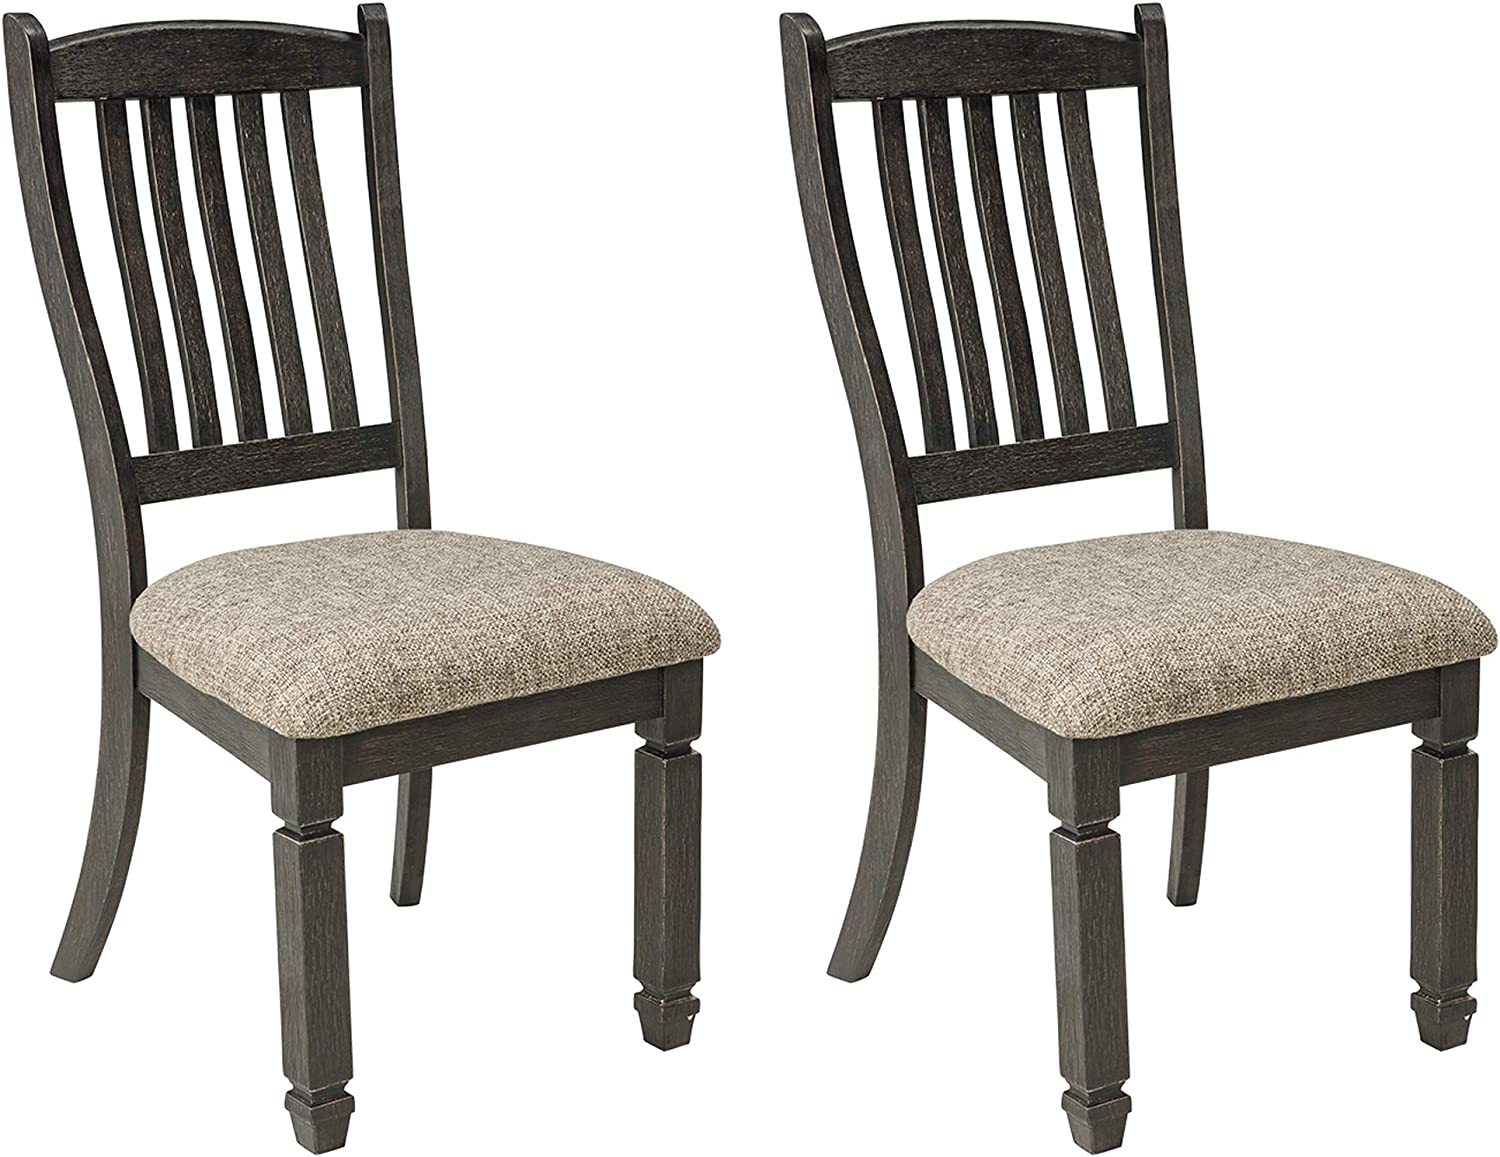 Signature Design by Ashley Tyler Creek Dining Room Upholstered Chair, Set of 2, - $198.99